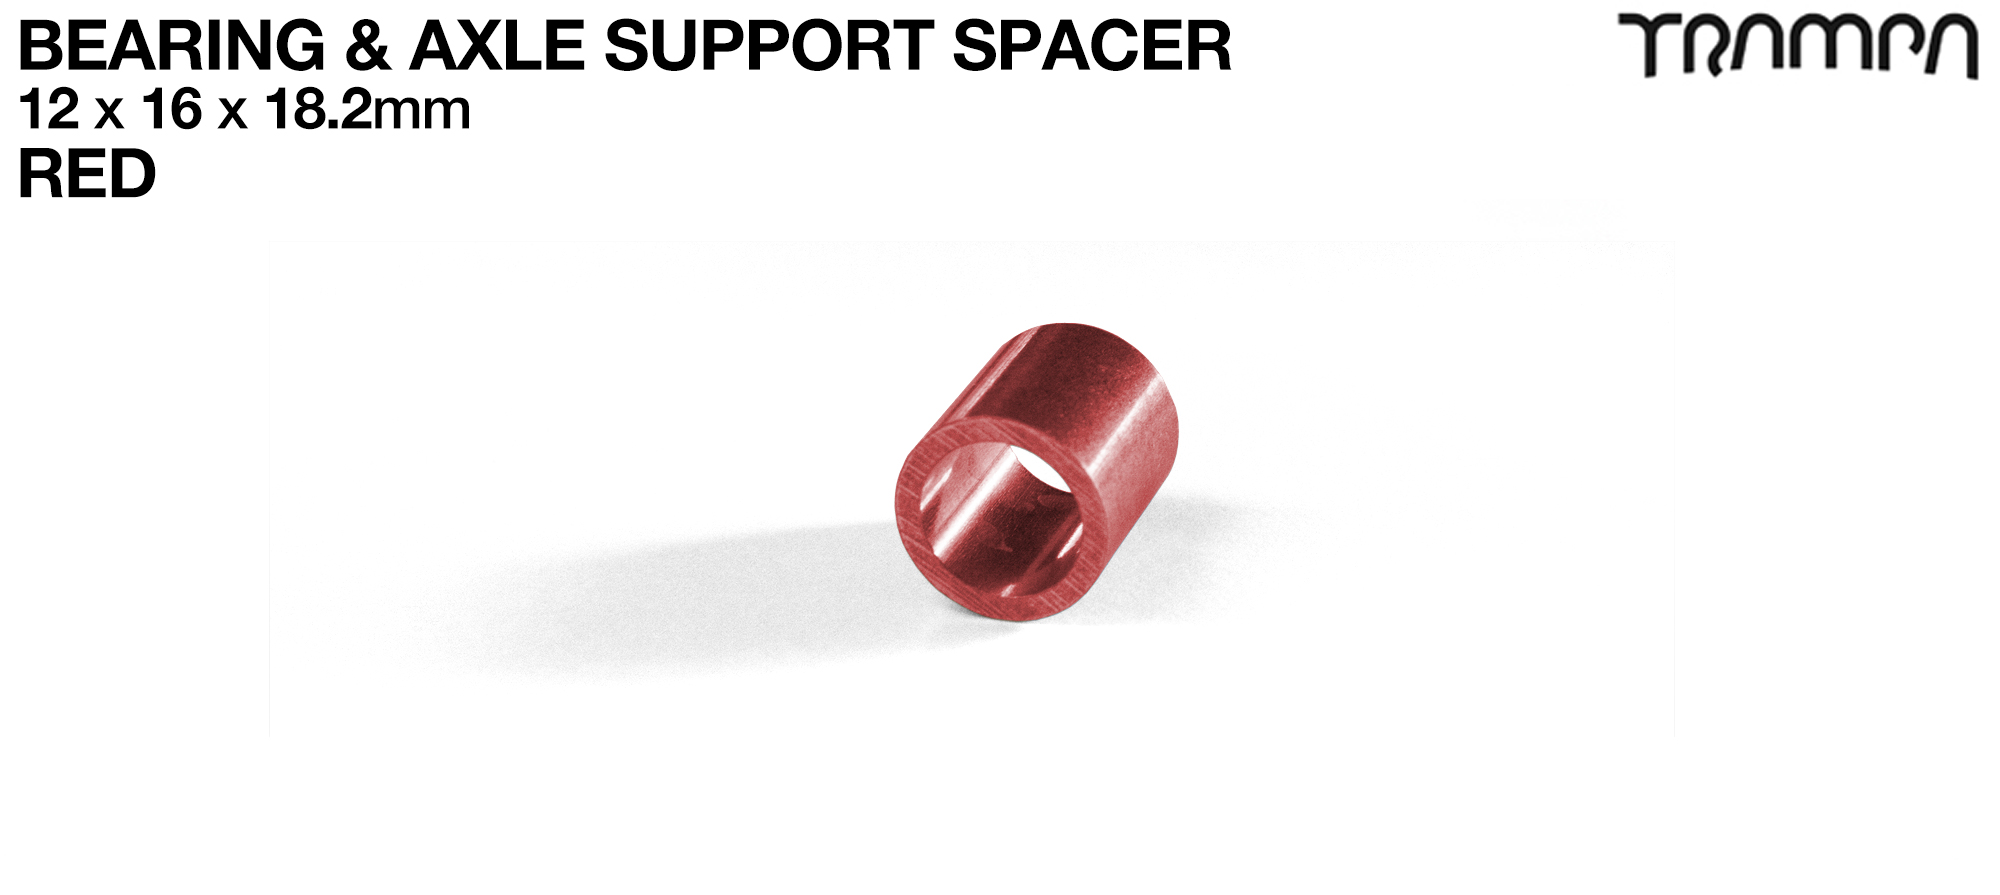 Wheel Support Axle Spacers - RED 